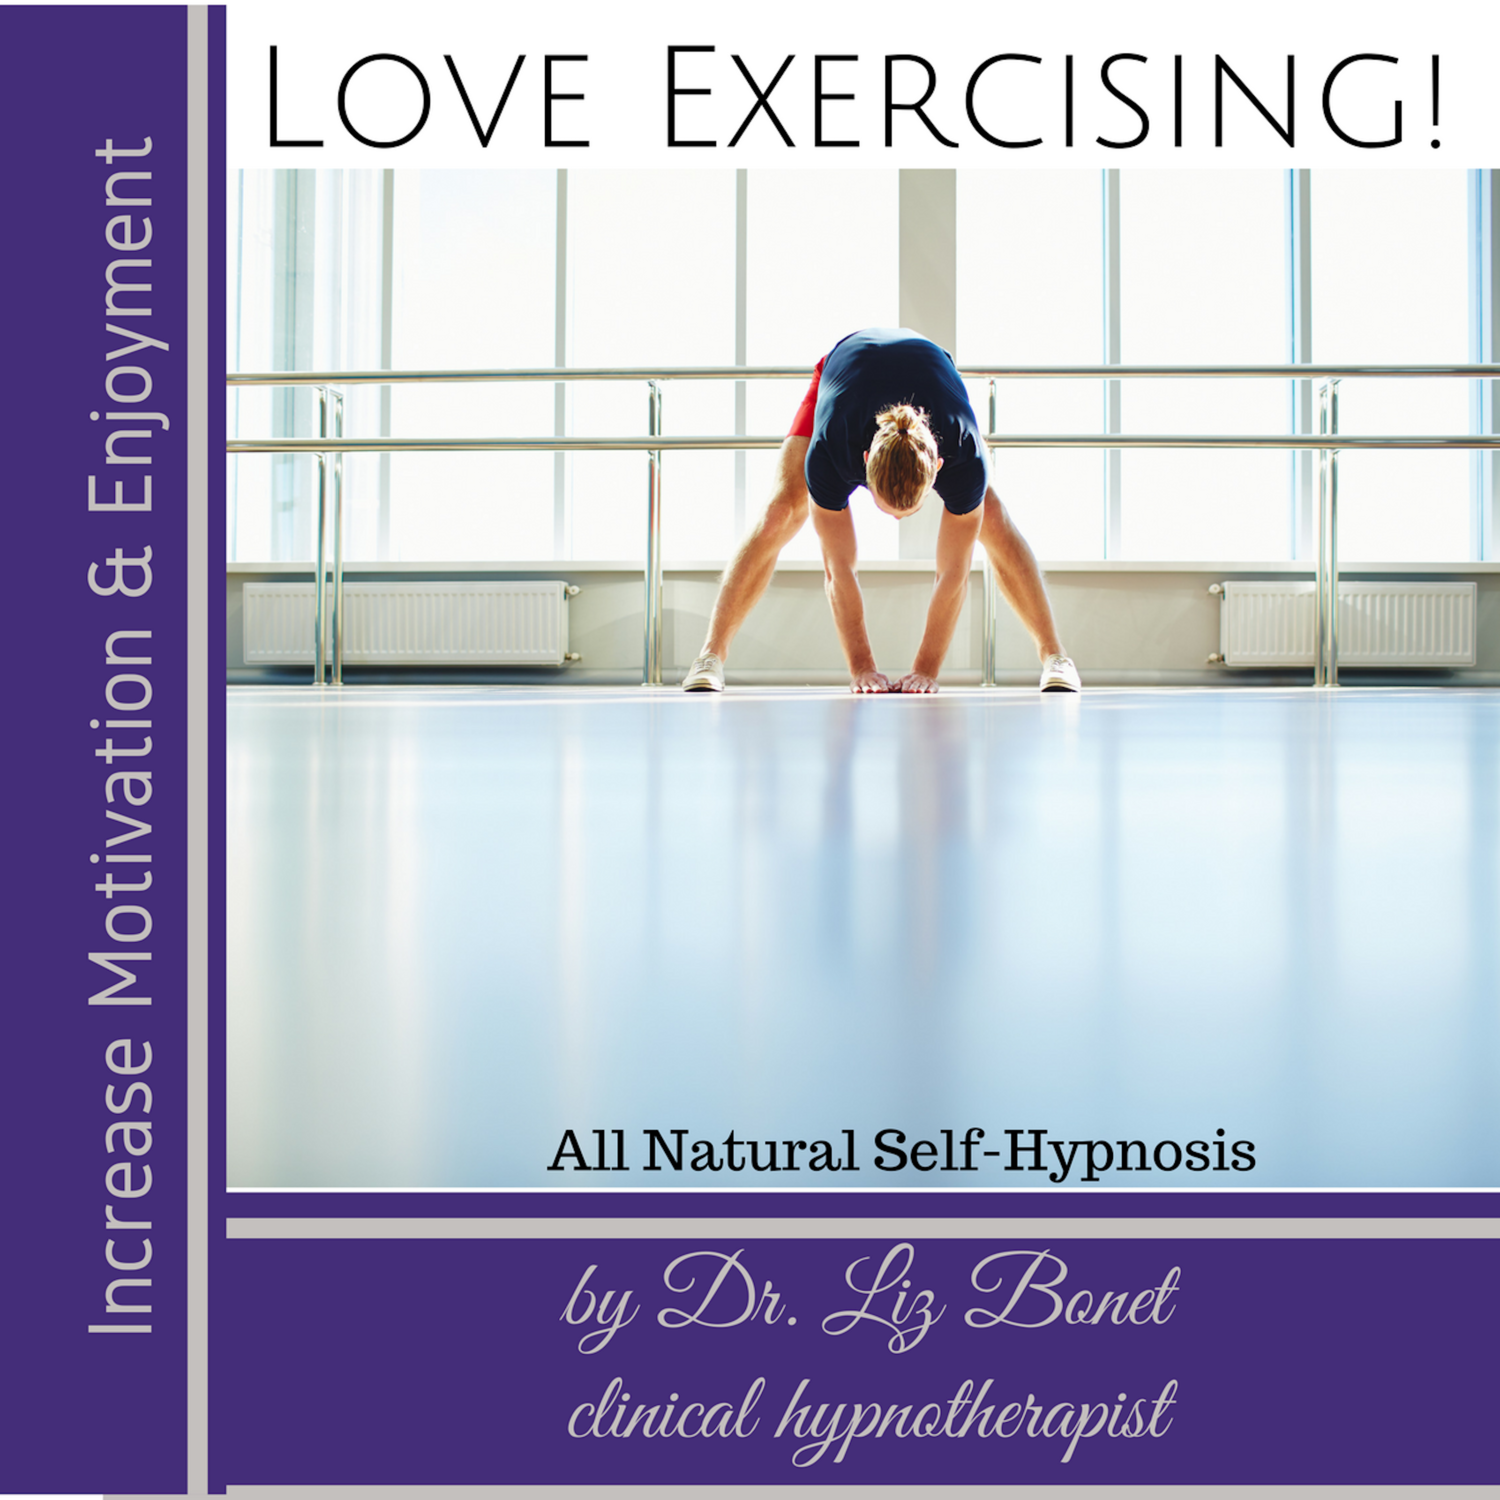 Hypnosis to Love Exercising!